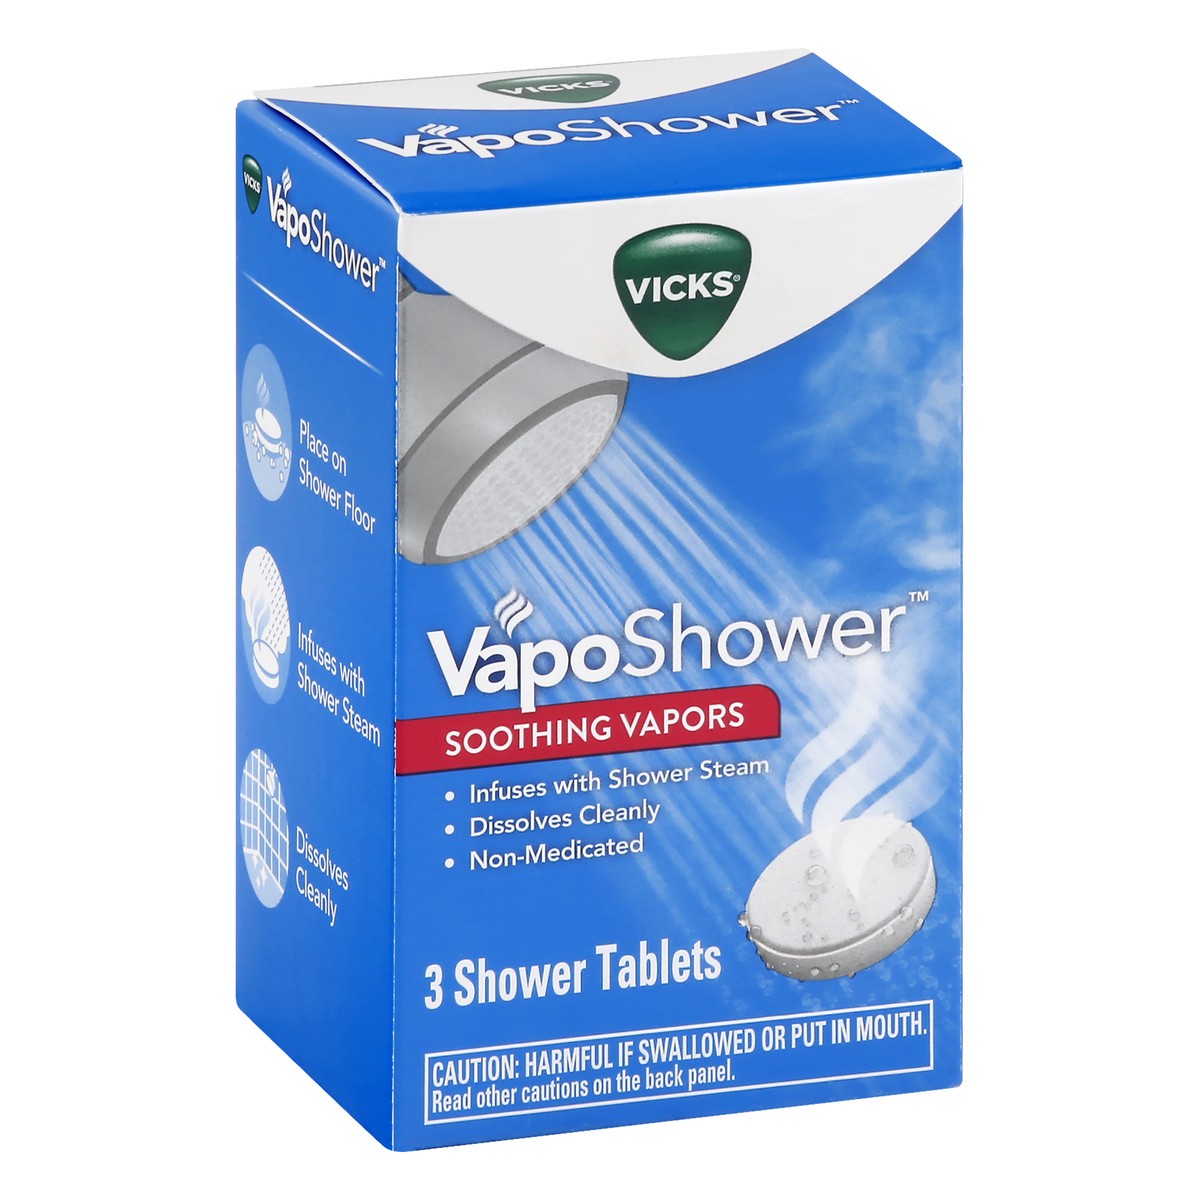 slide 5 of 9, Vicks VapoShower, Shower Steamers, Shower Tablets, Soothing Non-Medicated Vicks Vapors, Infuses into Shower Steam, Dissolves Cleanly, Aromatherapy Shower Bomb, Eucalyptus & Menthol, 3ct, 3 ct